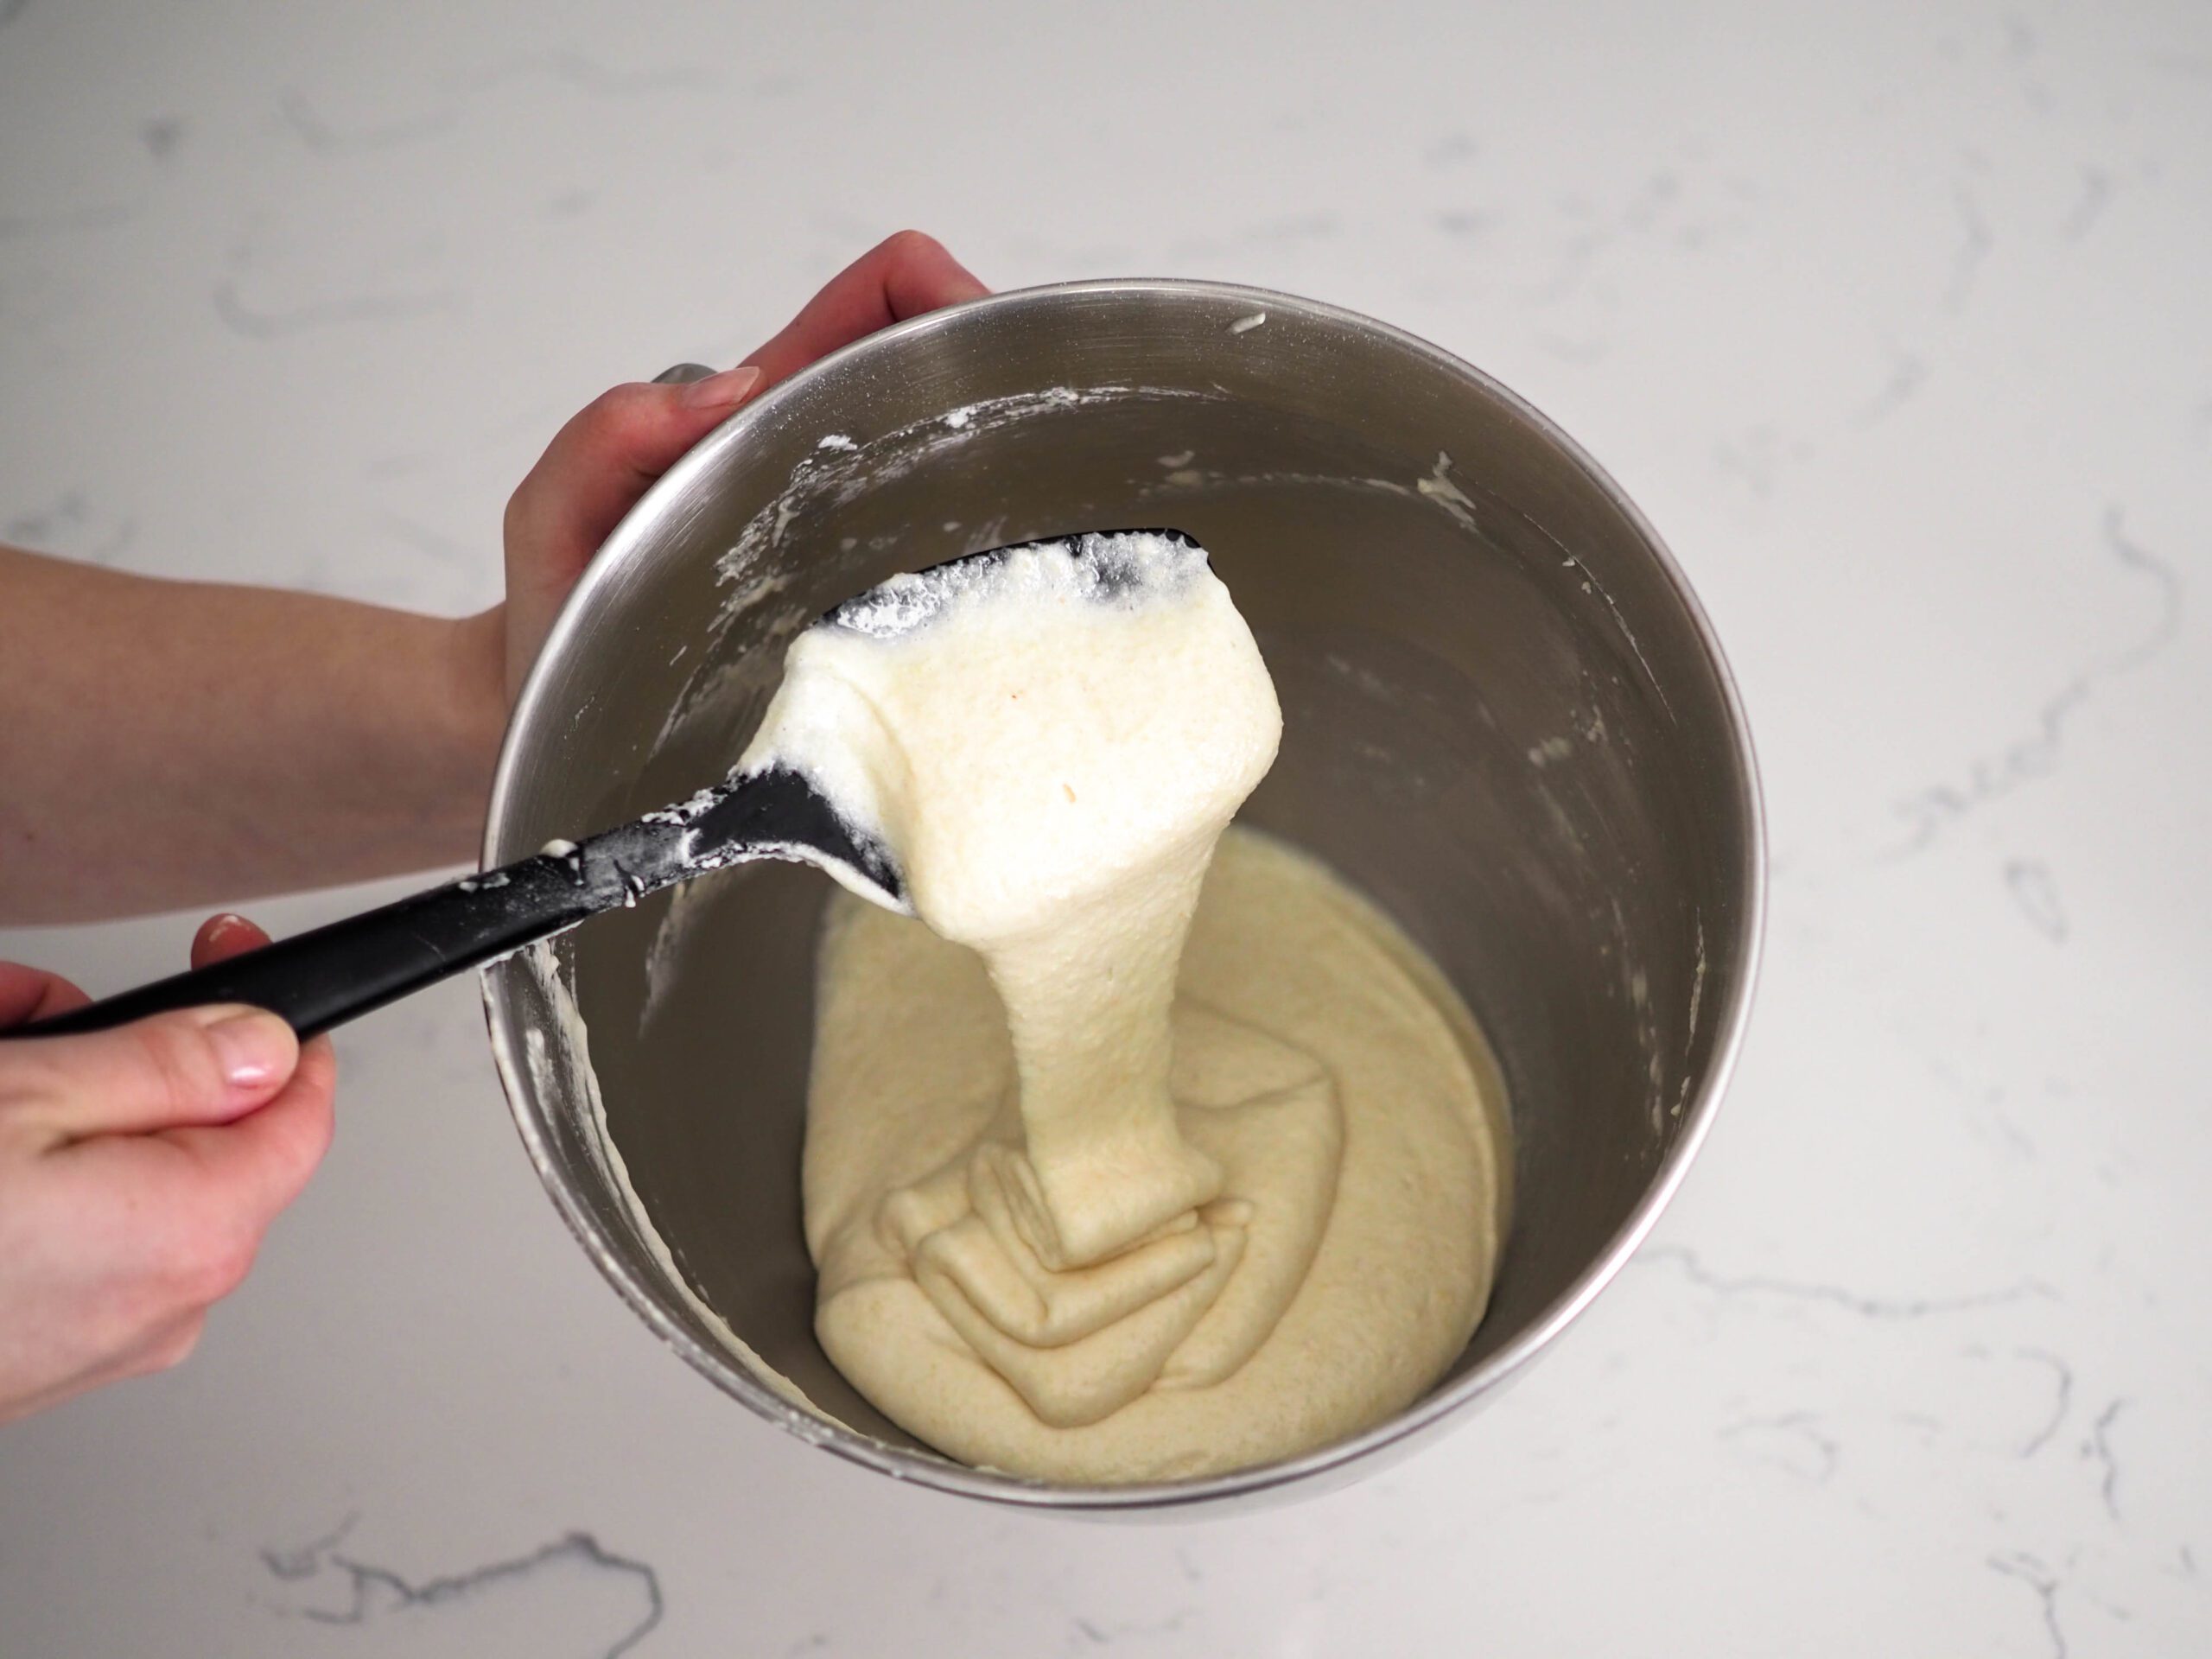 The macaron batter flows off the spatula in one long ribbon that stacks on top of itself in the bowl.